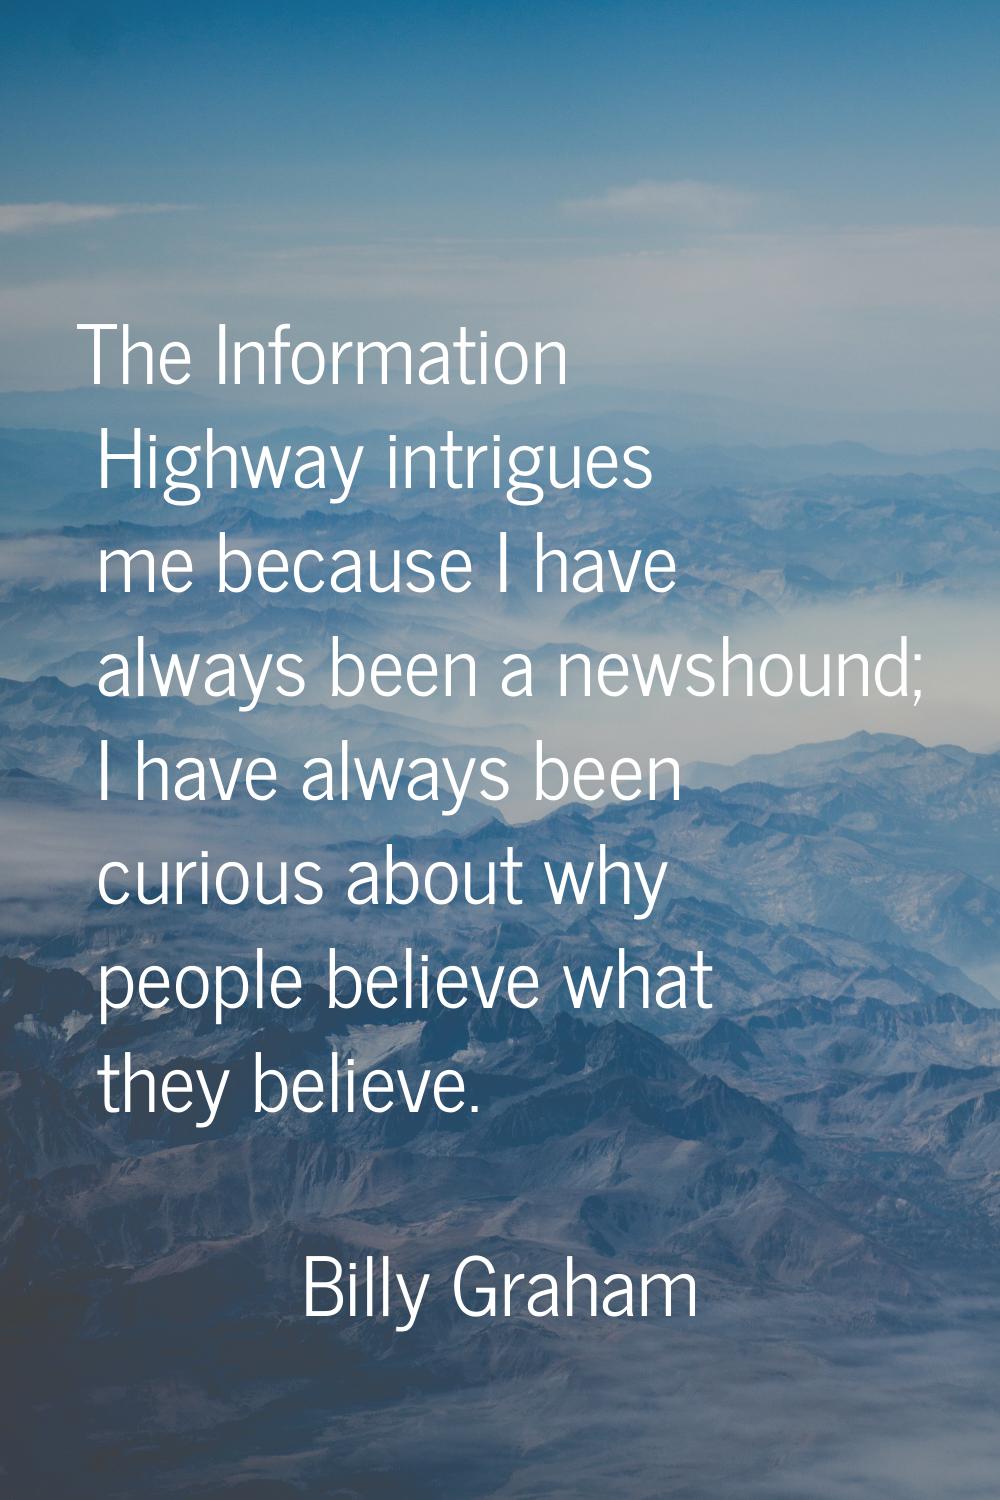 The Information Highway intrigues me because I have always been a newshound; I have always been cur